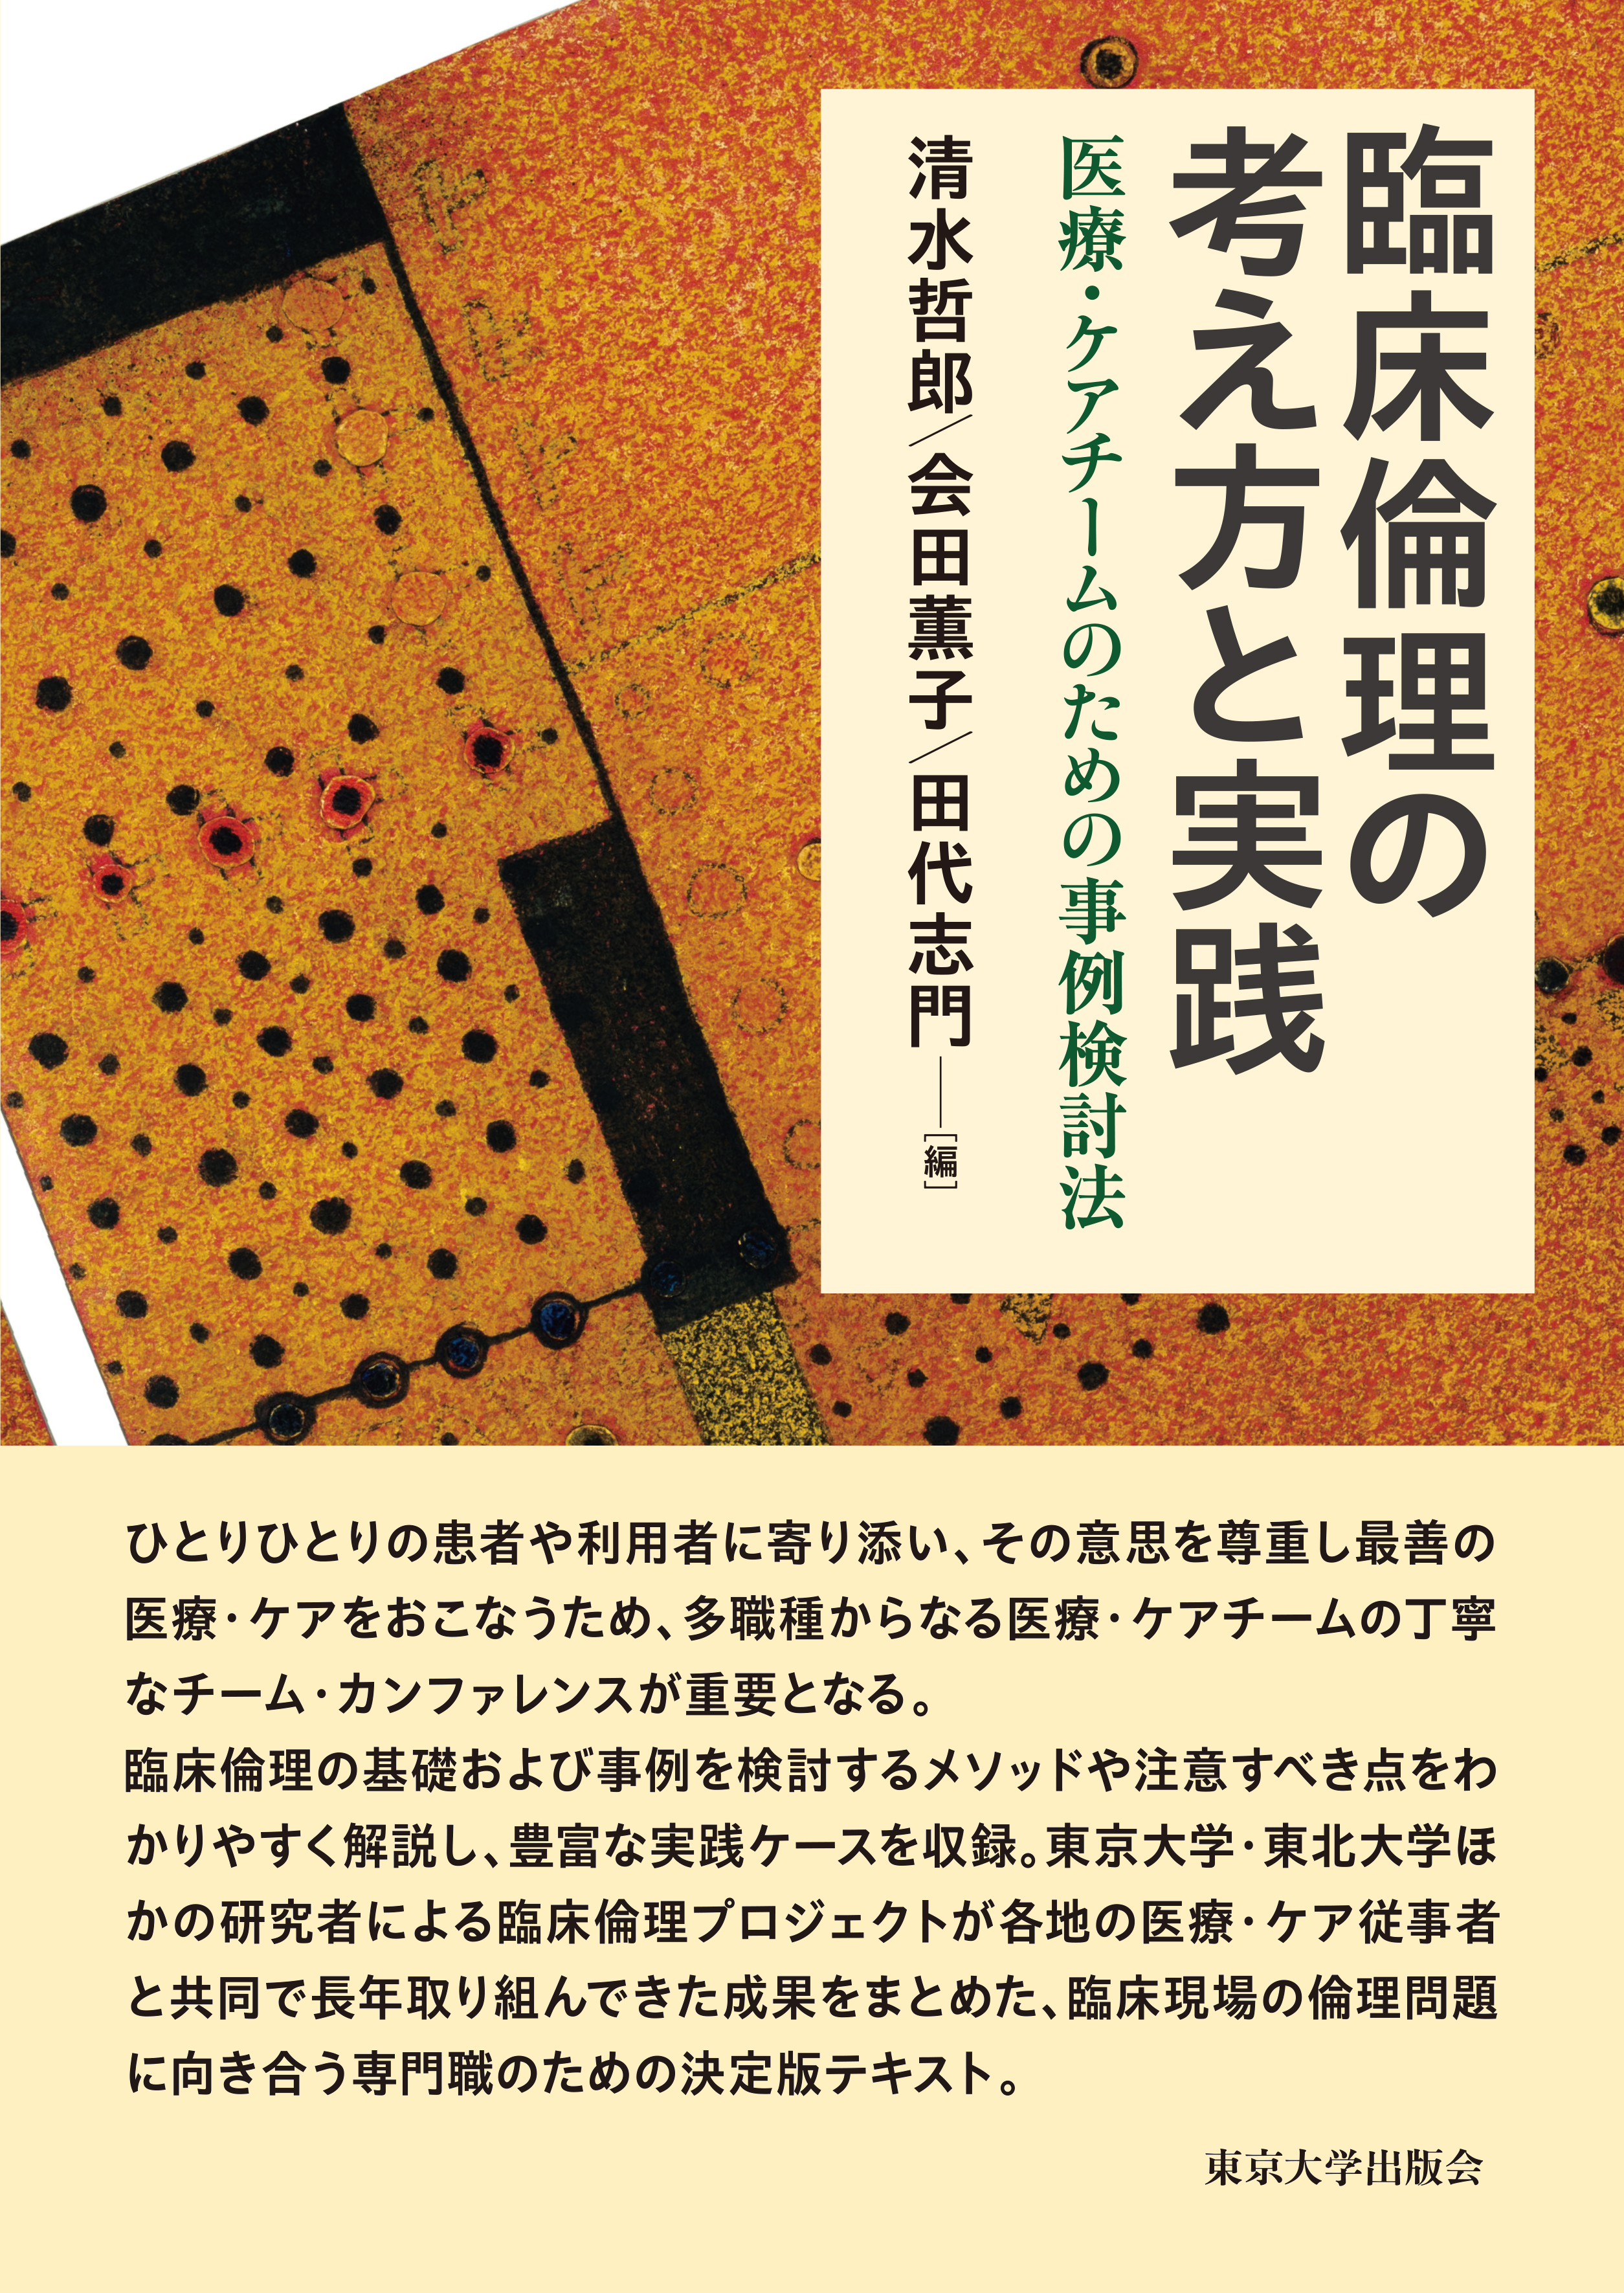 Several numbers of black dots on the brown object which is rusted, and the description of the book on a yellow book belt